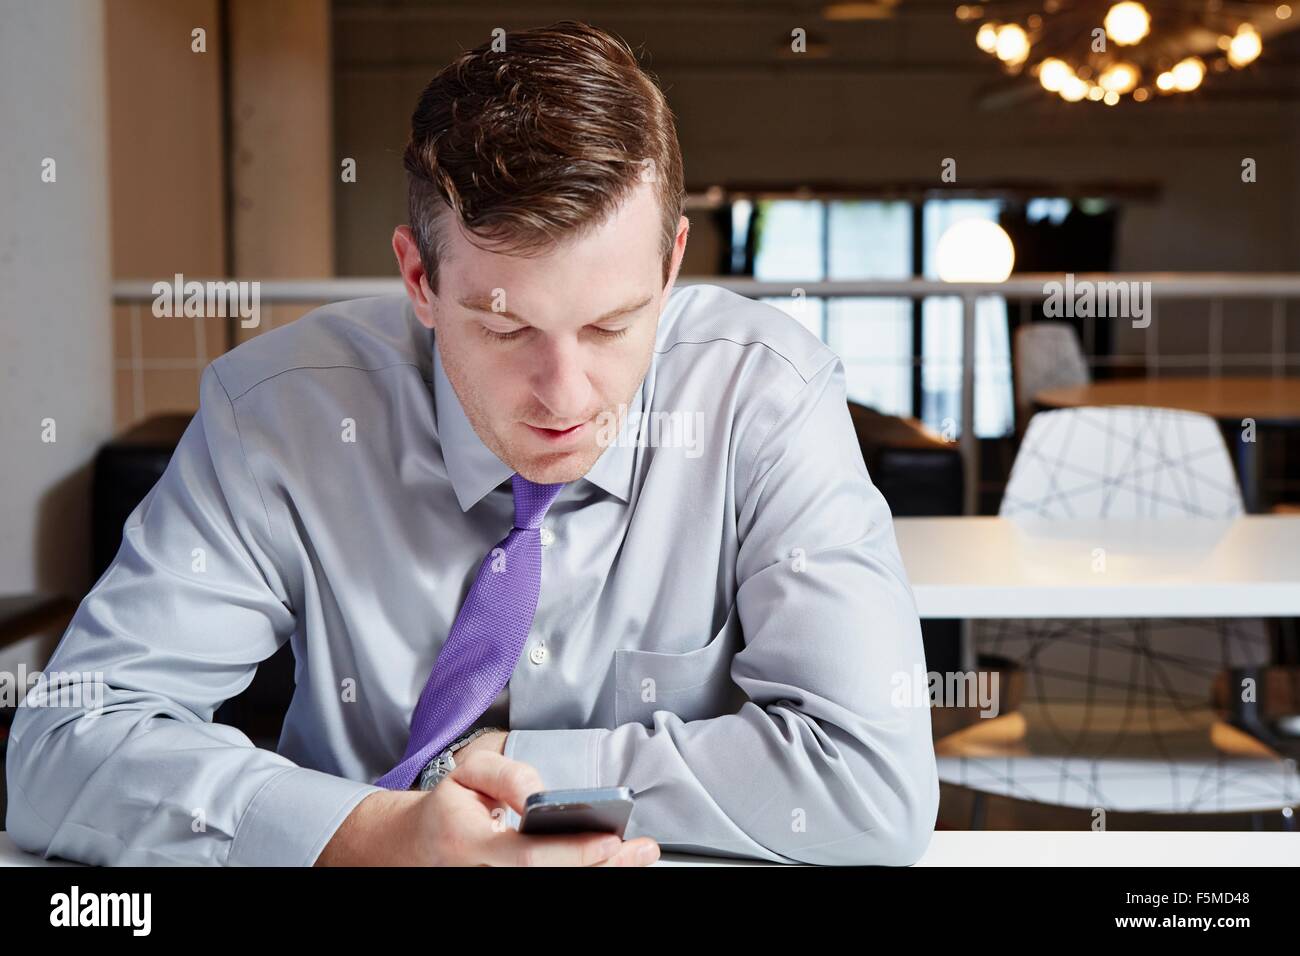 Mid adult businessman sitting at desk, looking at smartphone Banque D'Images